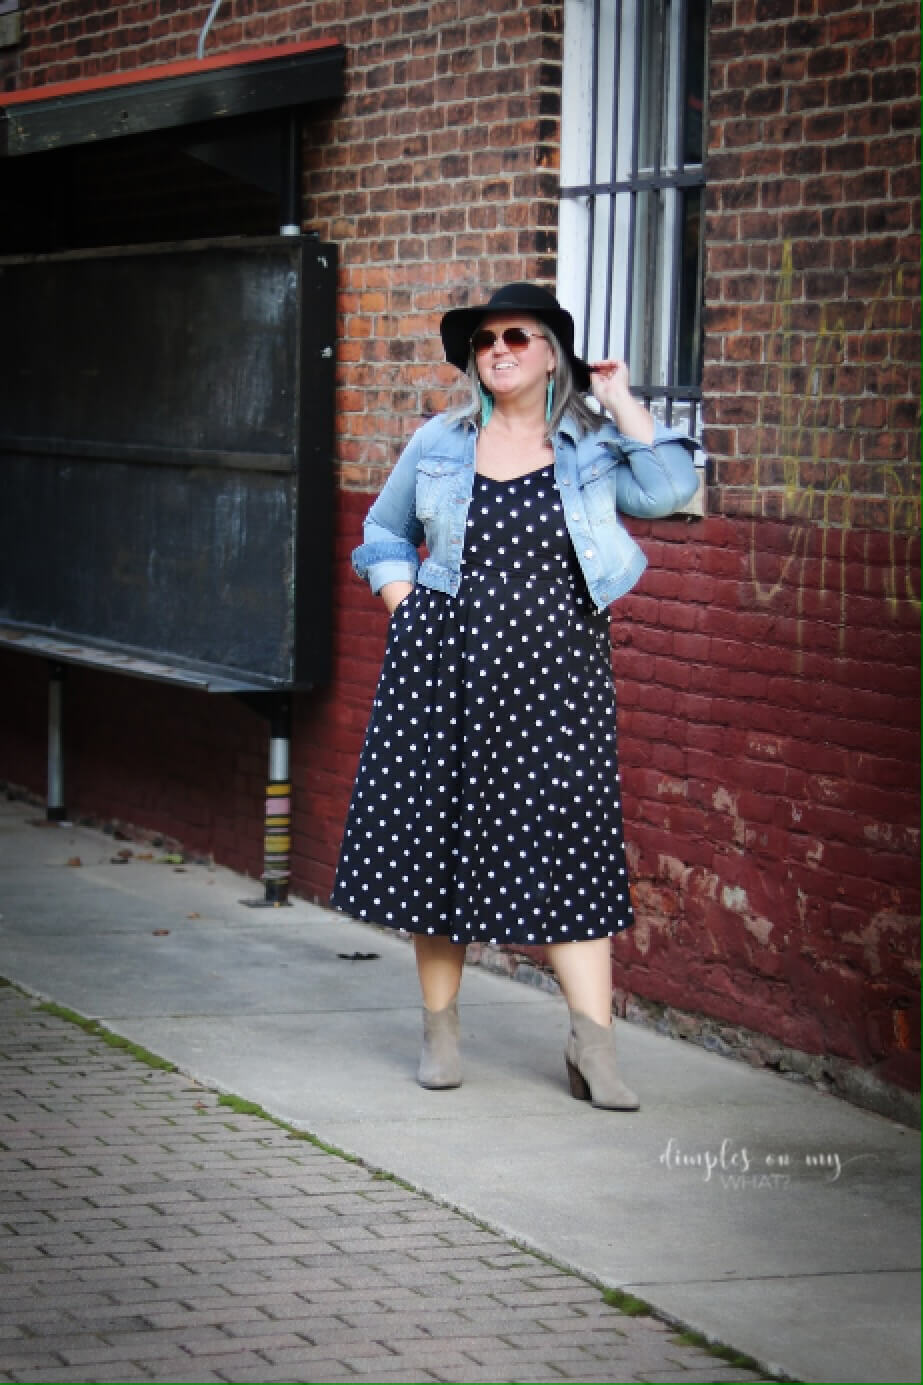 Plus size fall fashion inspiration is as close as your summer dresses. That's right. Here's how to style summer dresses into fall.

#plussizefashion
#falloutfitideas